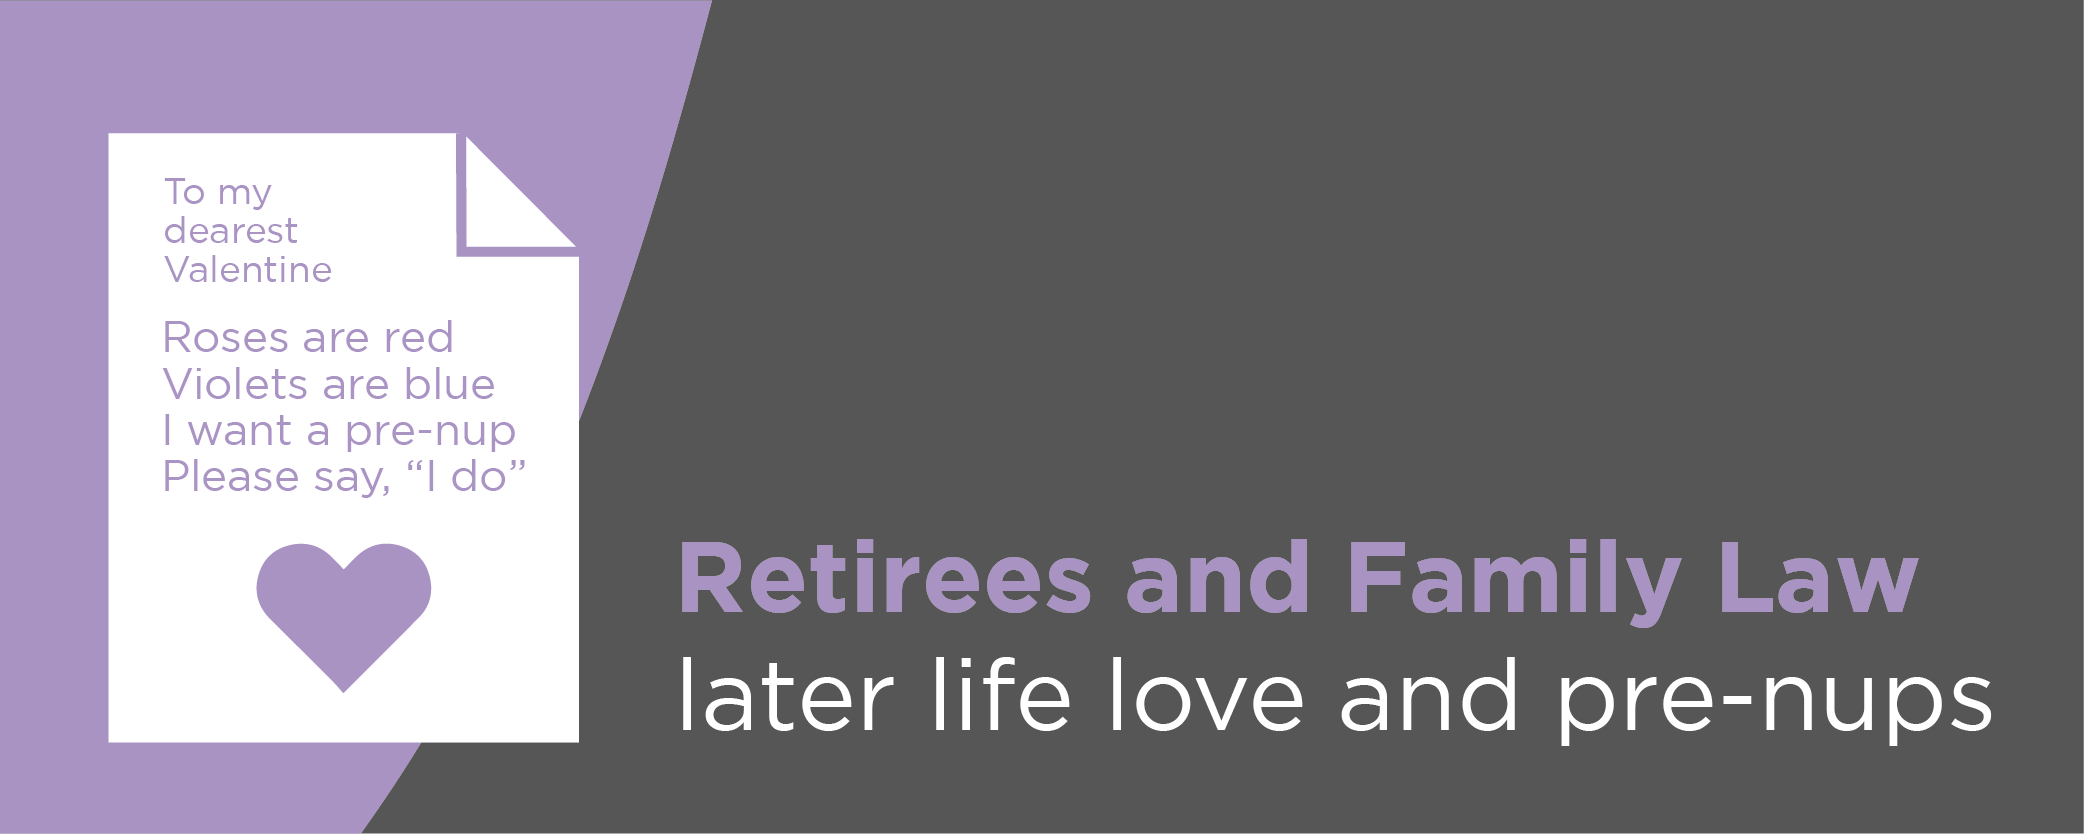 Retirees and Family Law: later life love and pre-nups